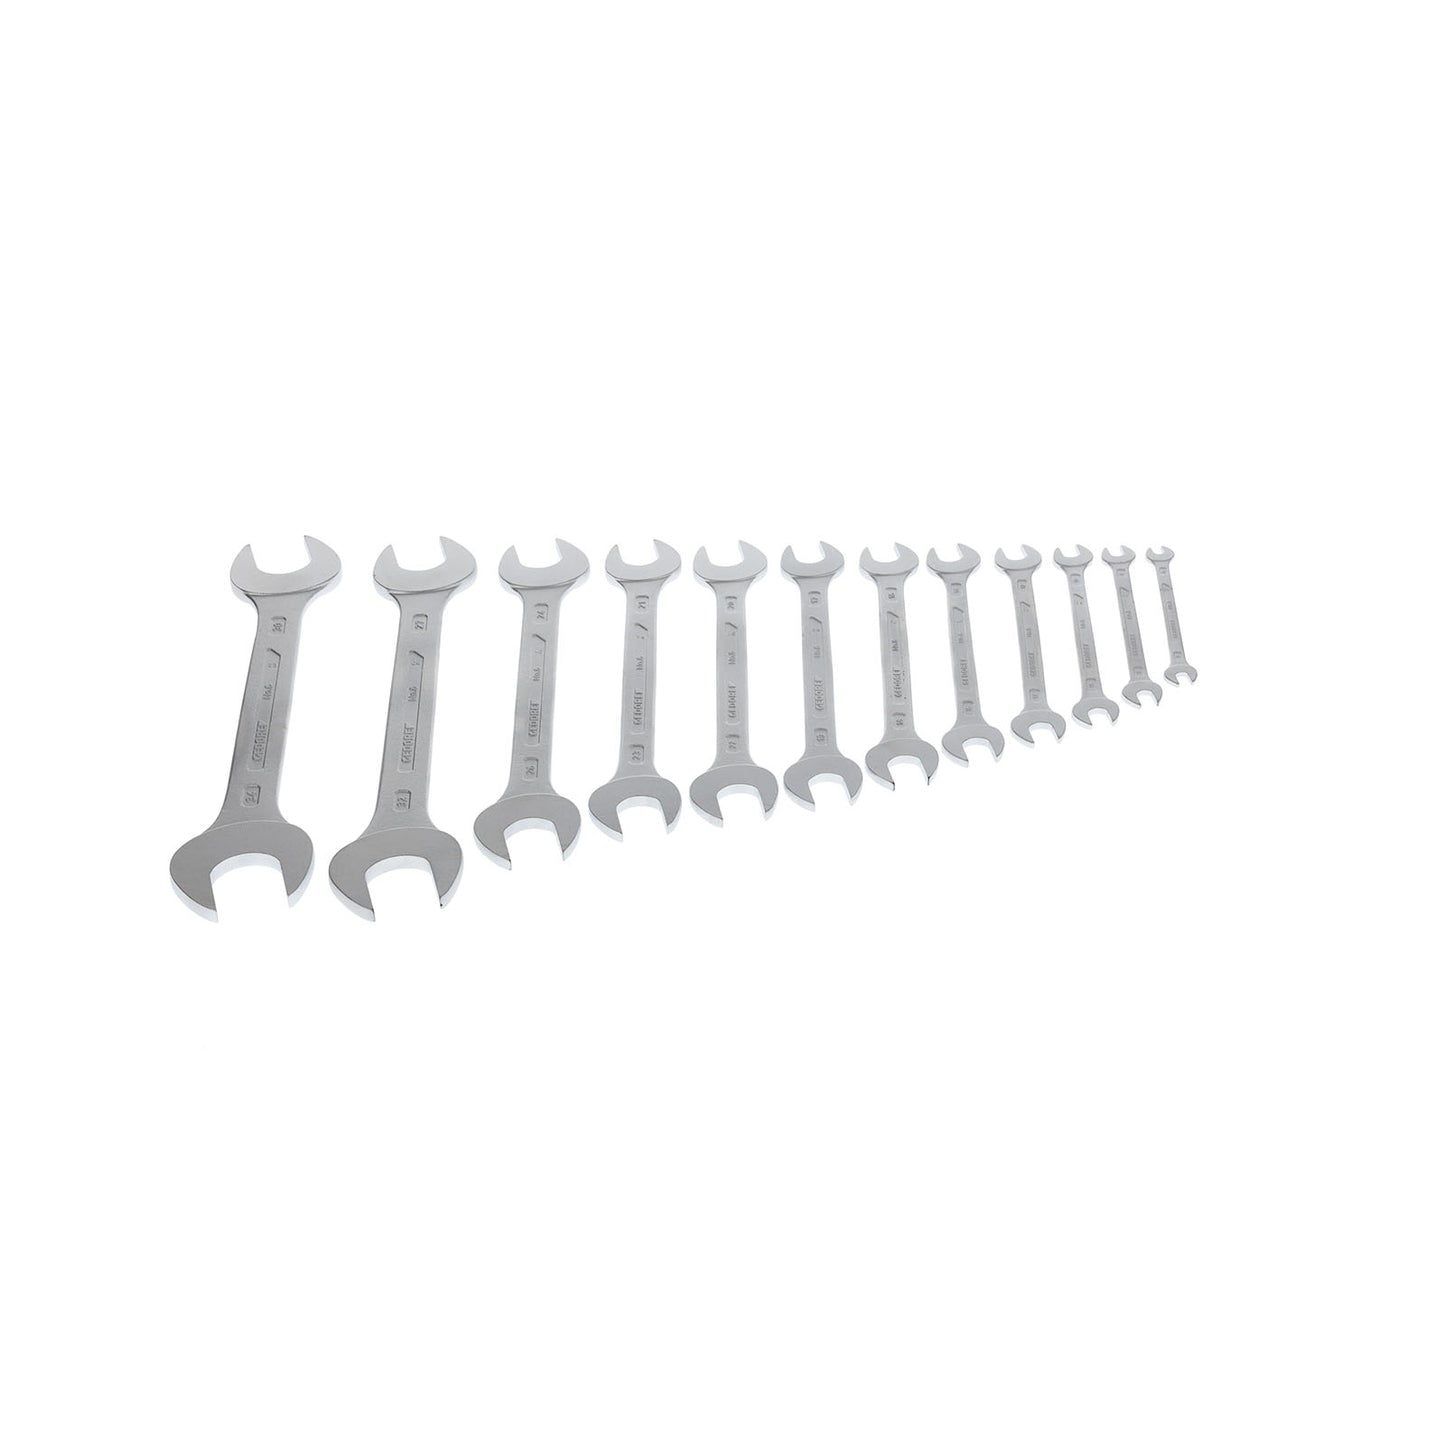 GEDORE 6-122 ISO - Set of 12 2-Mount Fixed Wrenches (6078350)